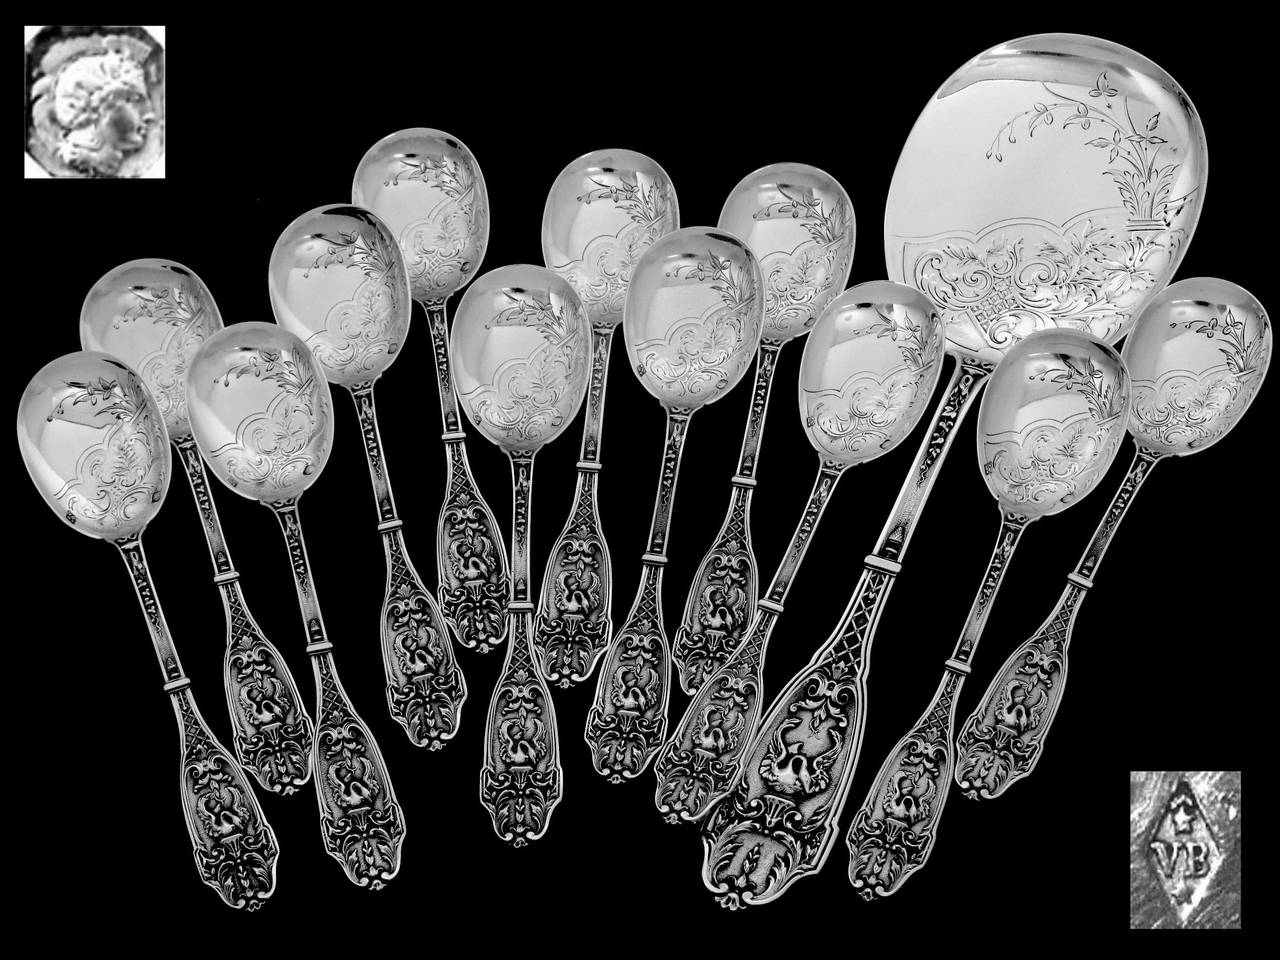 Empire Boivin Fabulous French All Sterling Silver Ice Cream Set 13 pc Swans